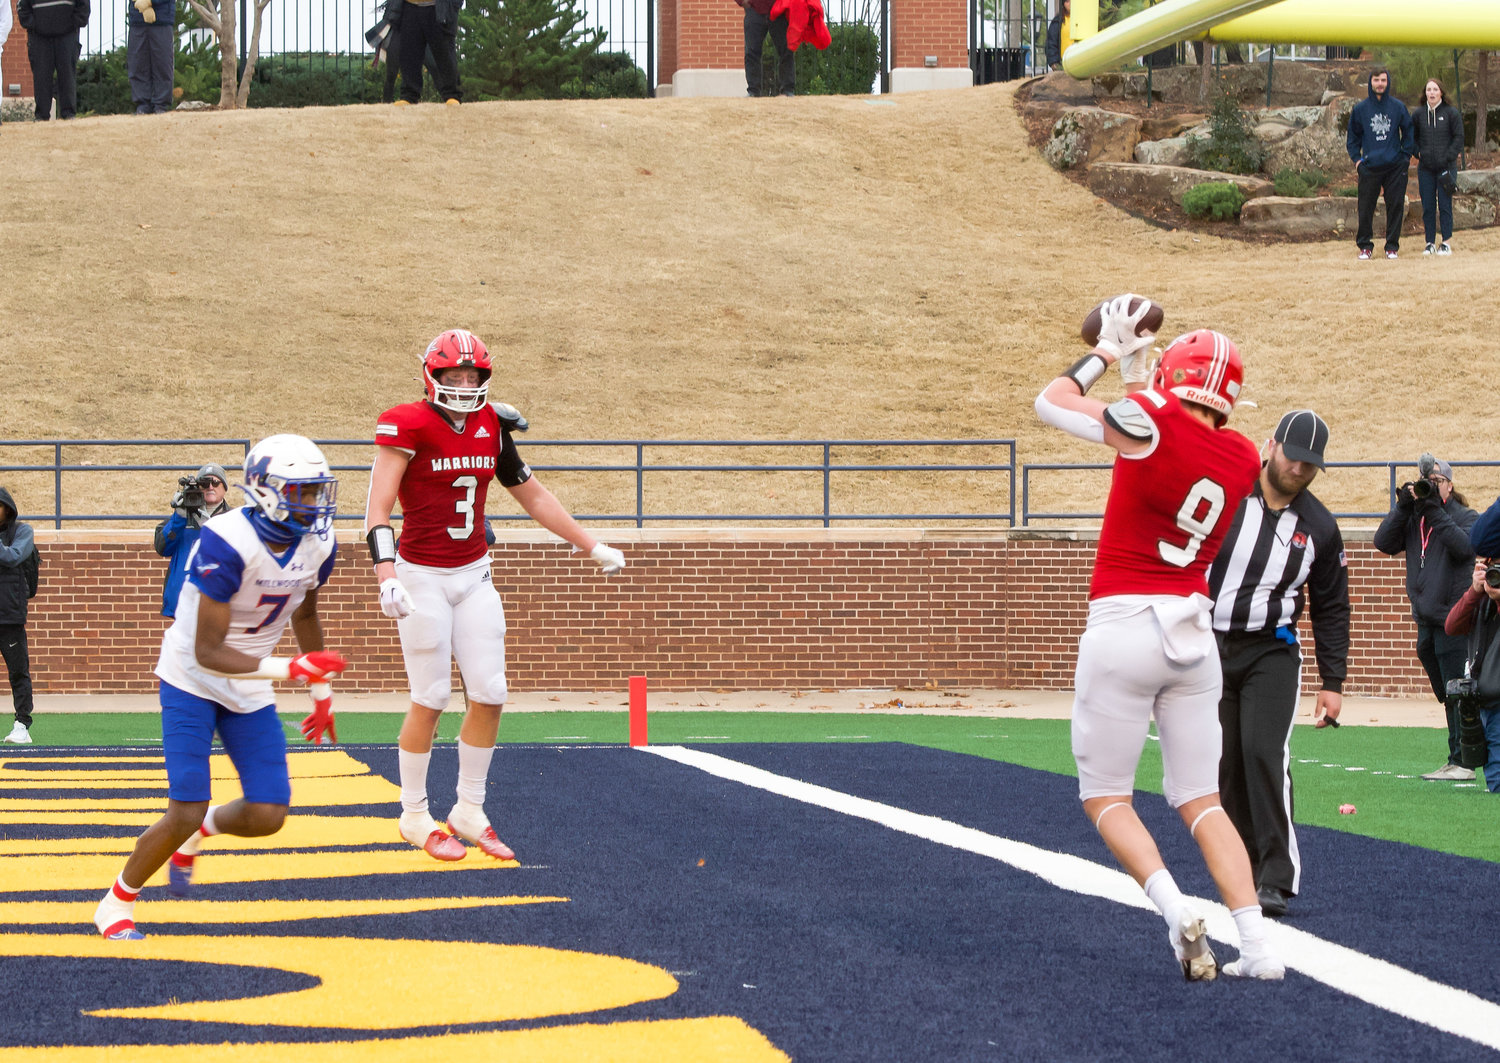 Washington sophomore Nate Roberts (9) catches the game-clinching touchdown from quarterback Major Cantrell during the Warriors’ 17-14 State championship win over Millwood on Saturday afternoon.